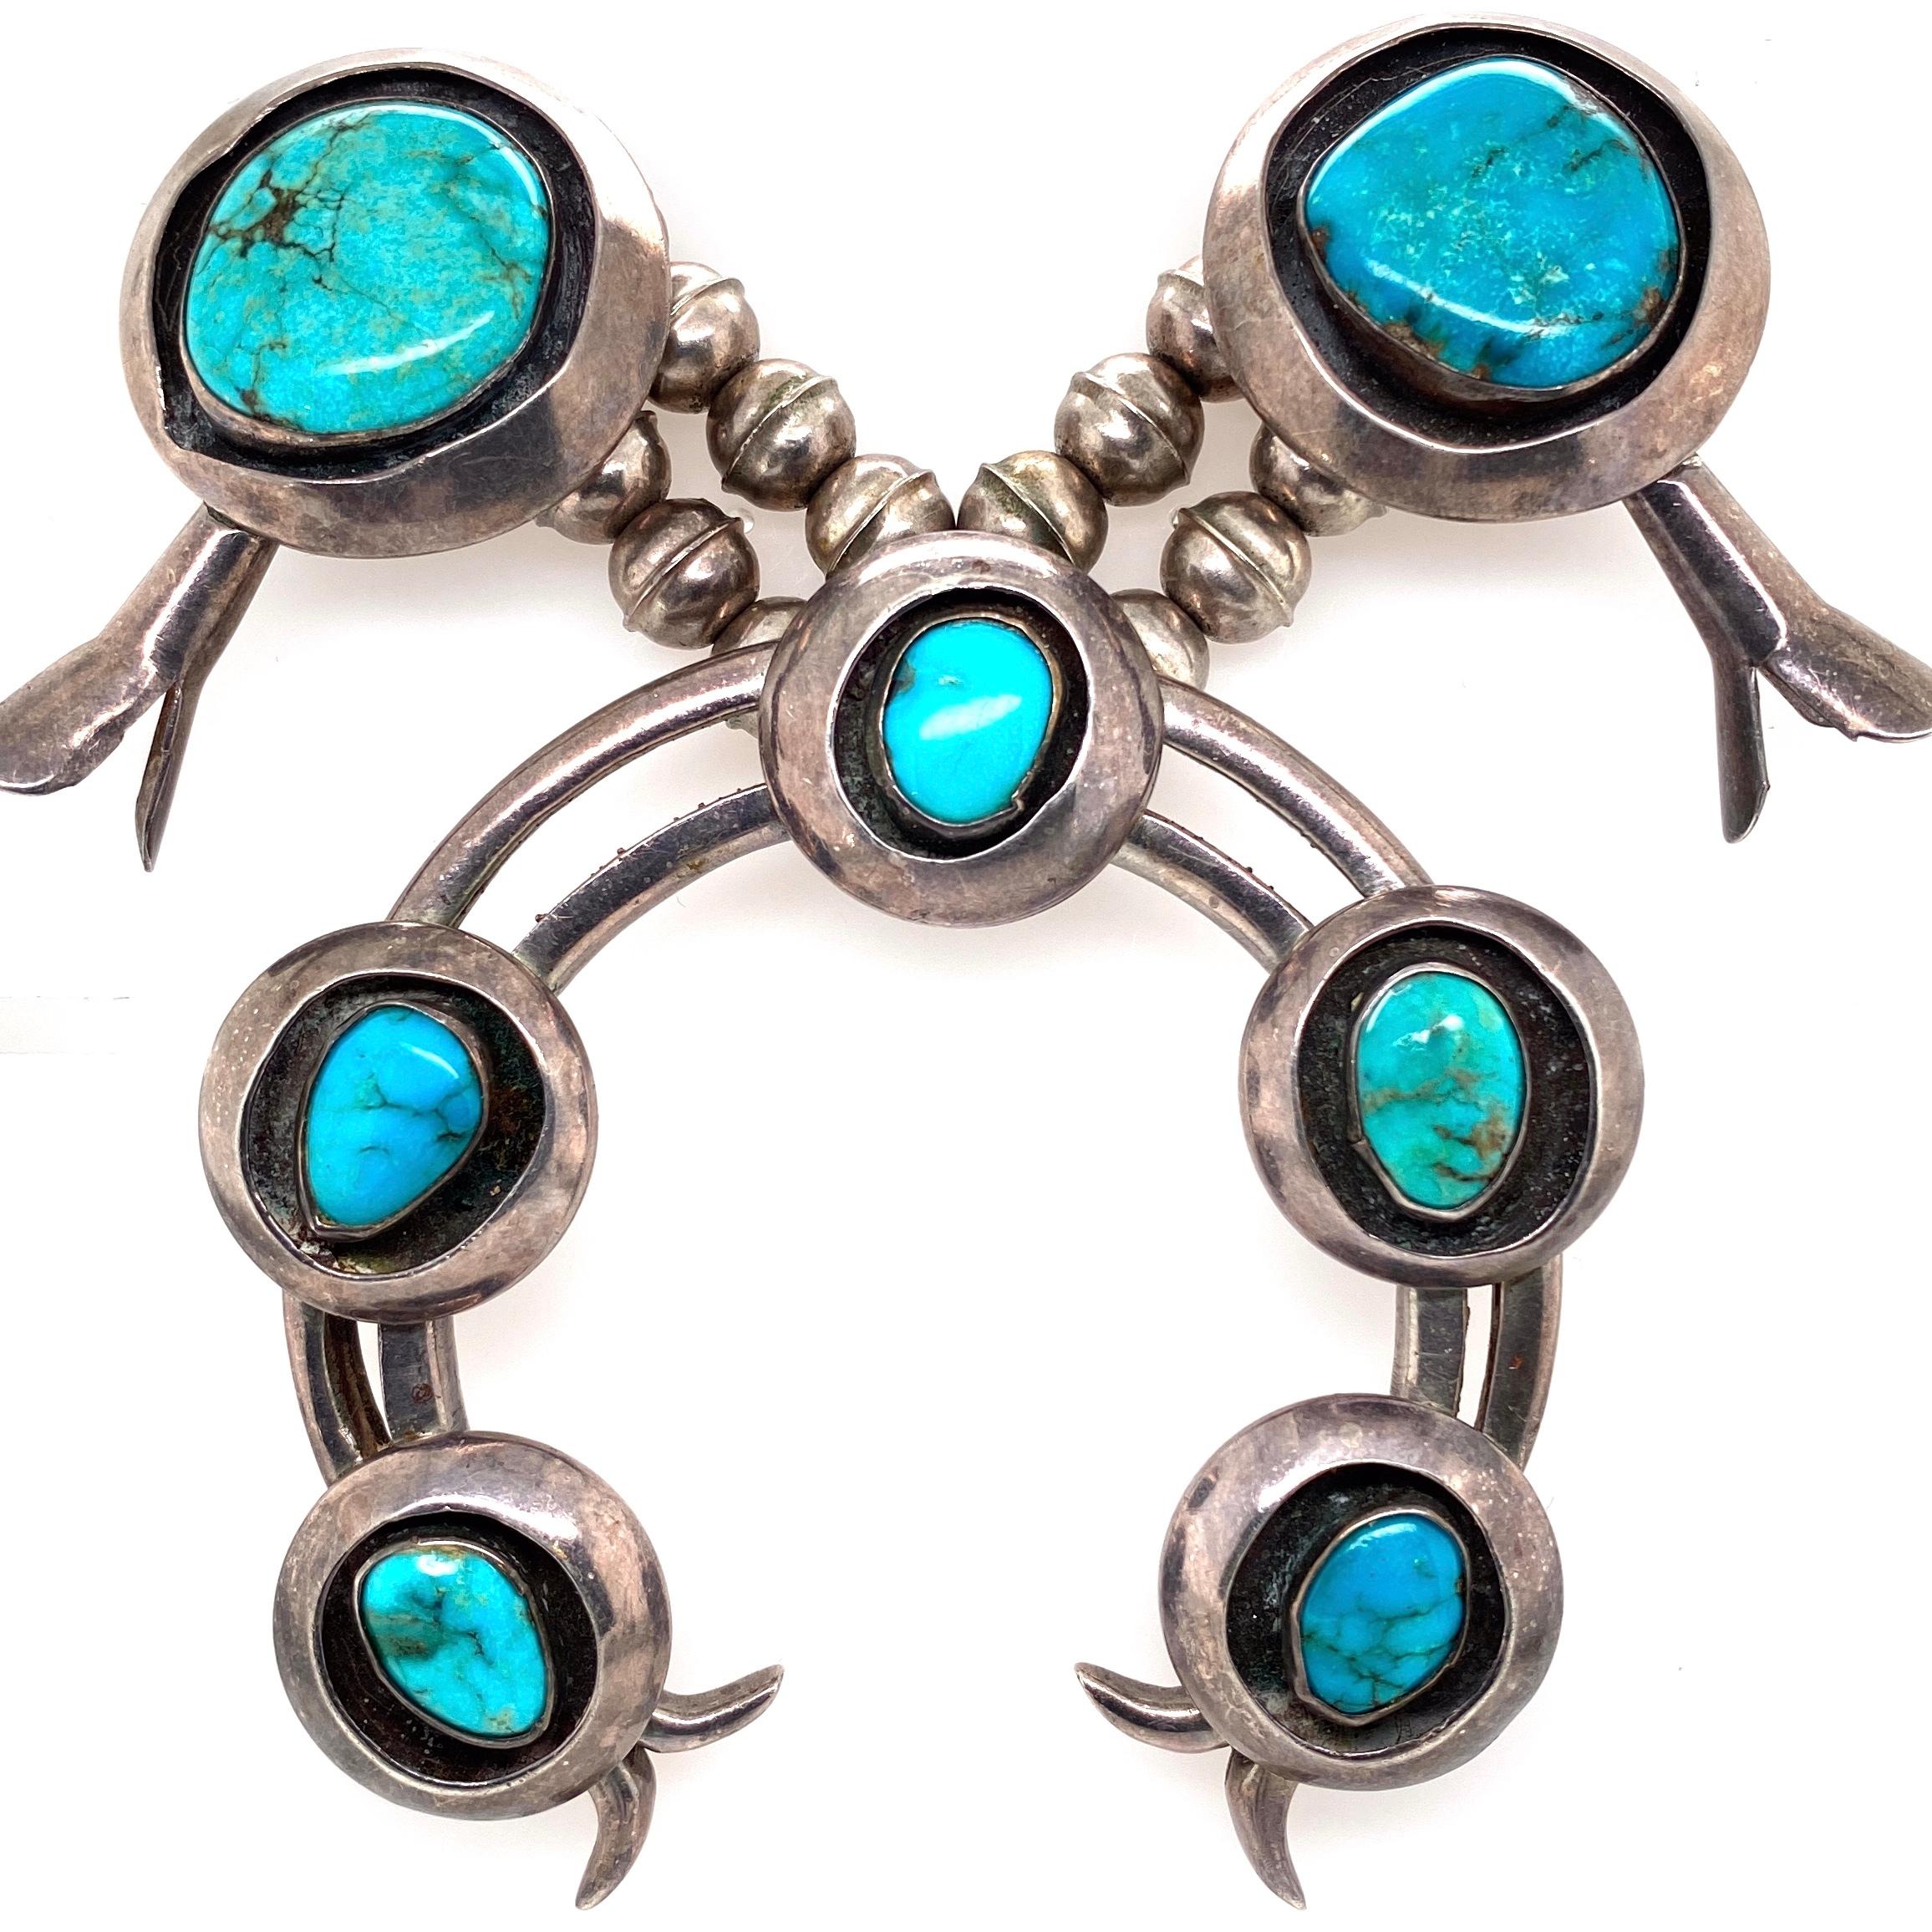 Modernist Native American Turquoise Old Pawn Navajo Squash Blossom 925 Silver Necklace